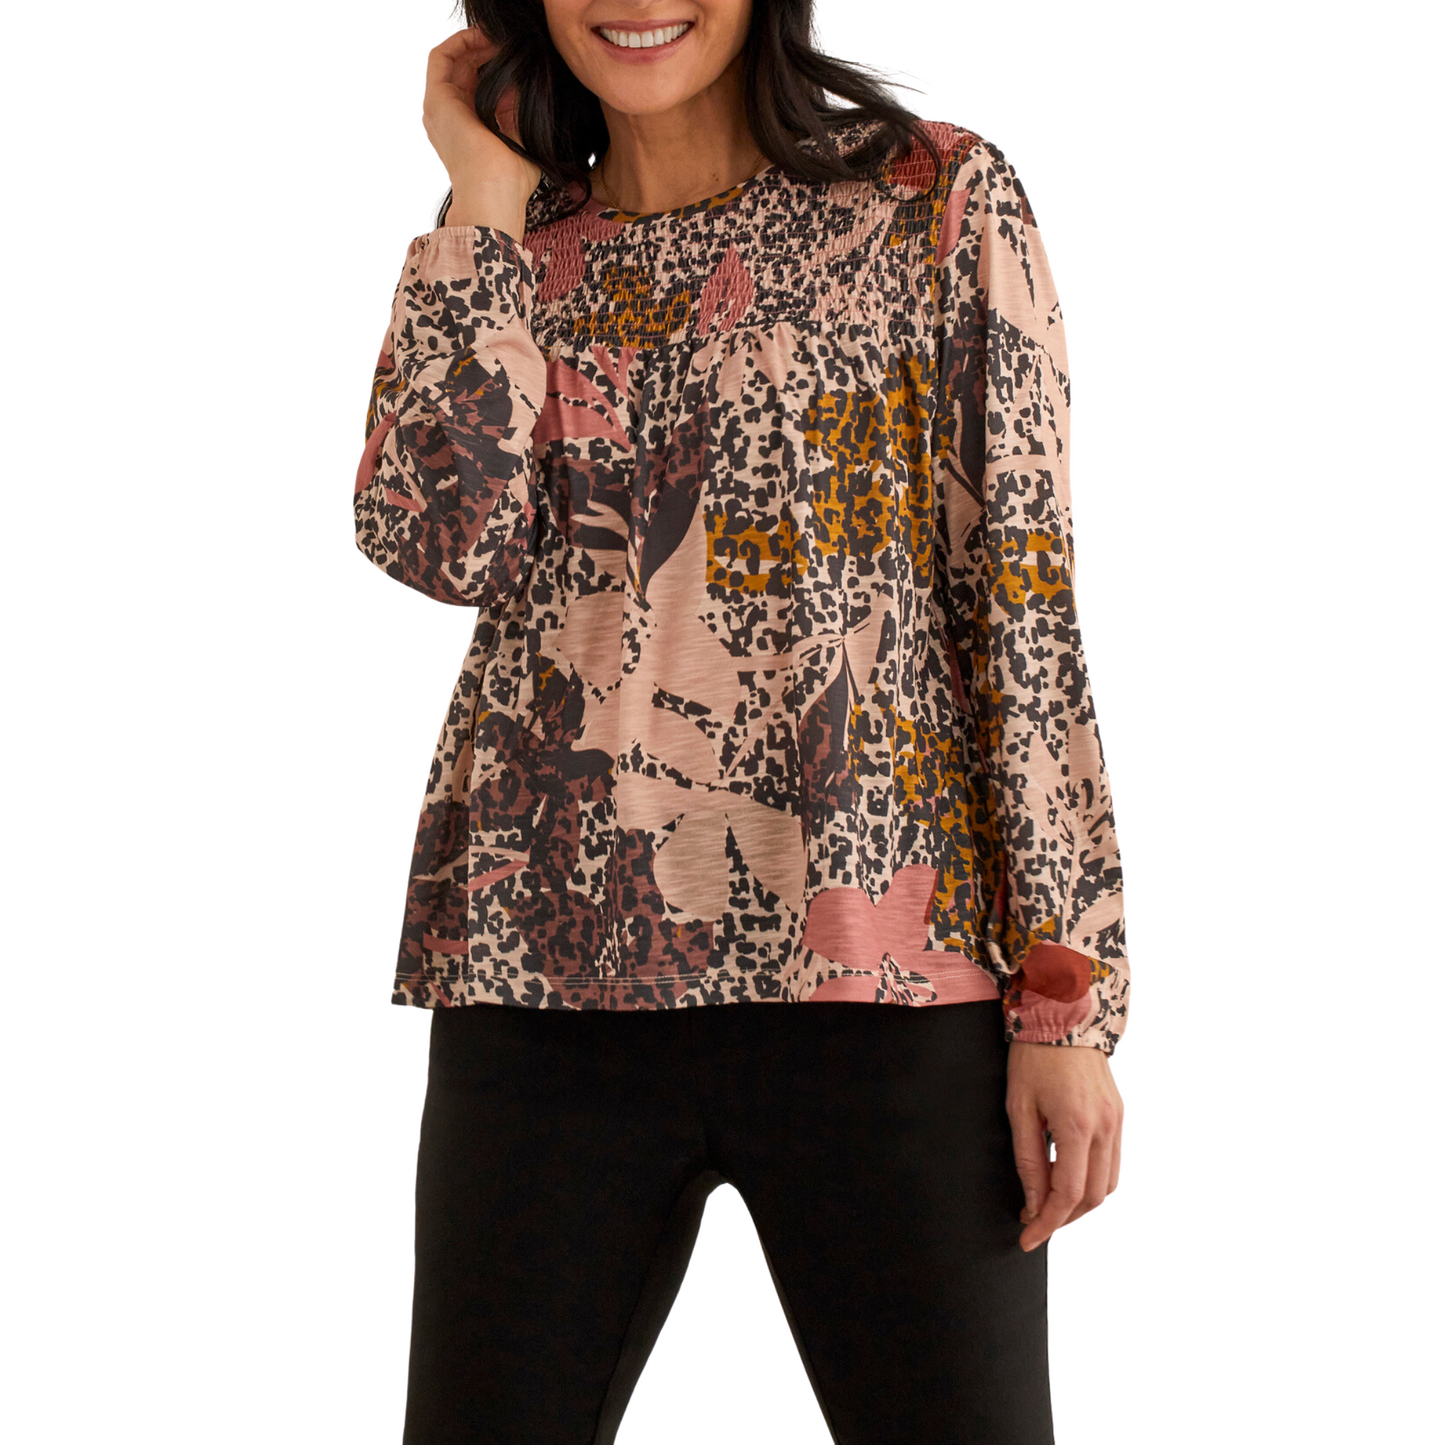 Stay warm and stylish with this brown Long Sleeve Smocked Top, featuring a beautiful floral pattern. The long sleeve and smocked design ensures comfortable wear, while still displaying a fashionable look. Perfect for any day or night event.